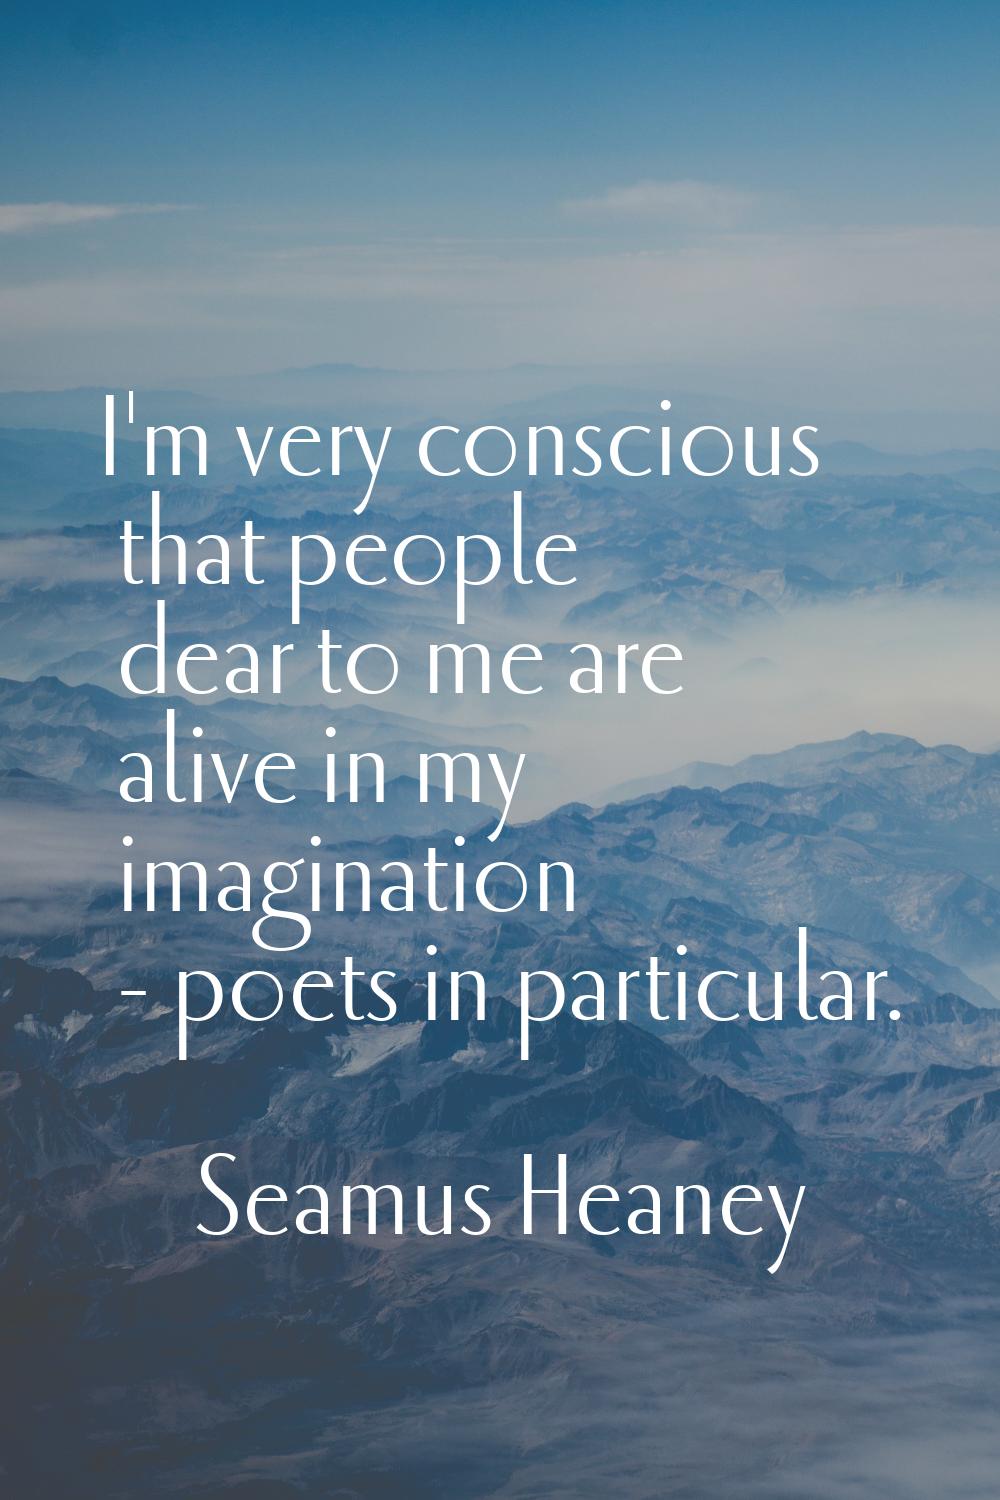 I'm very conscious that people dear to me are alive in my imagination - poets in particular.